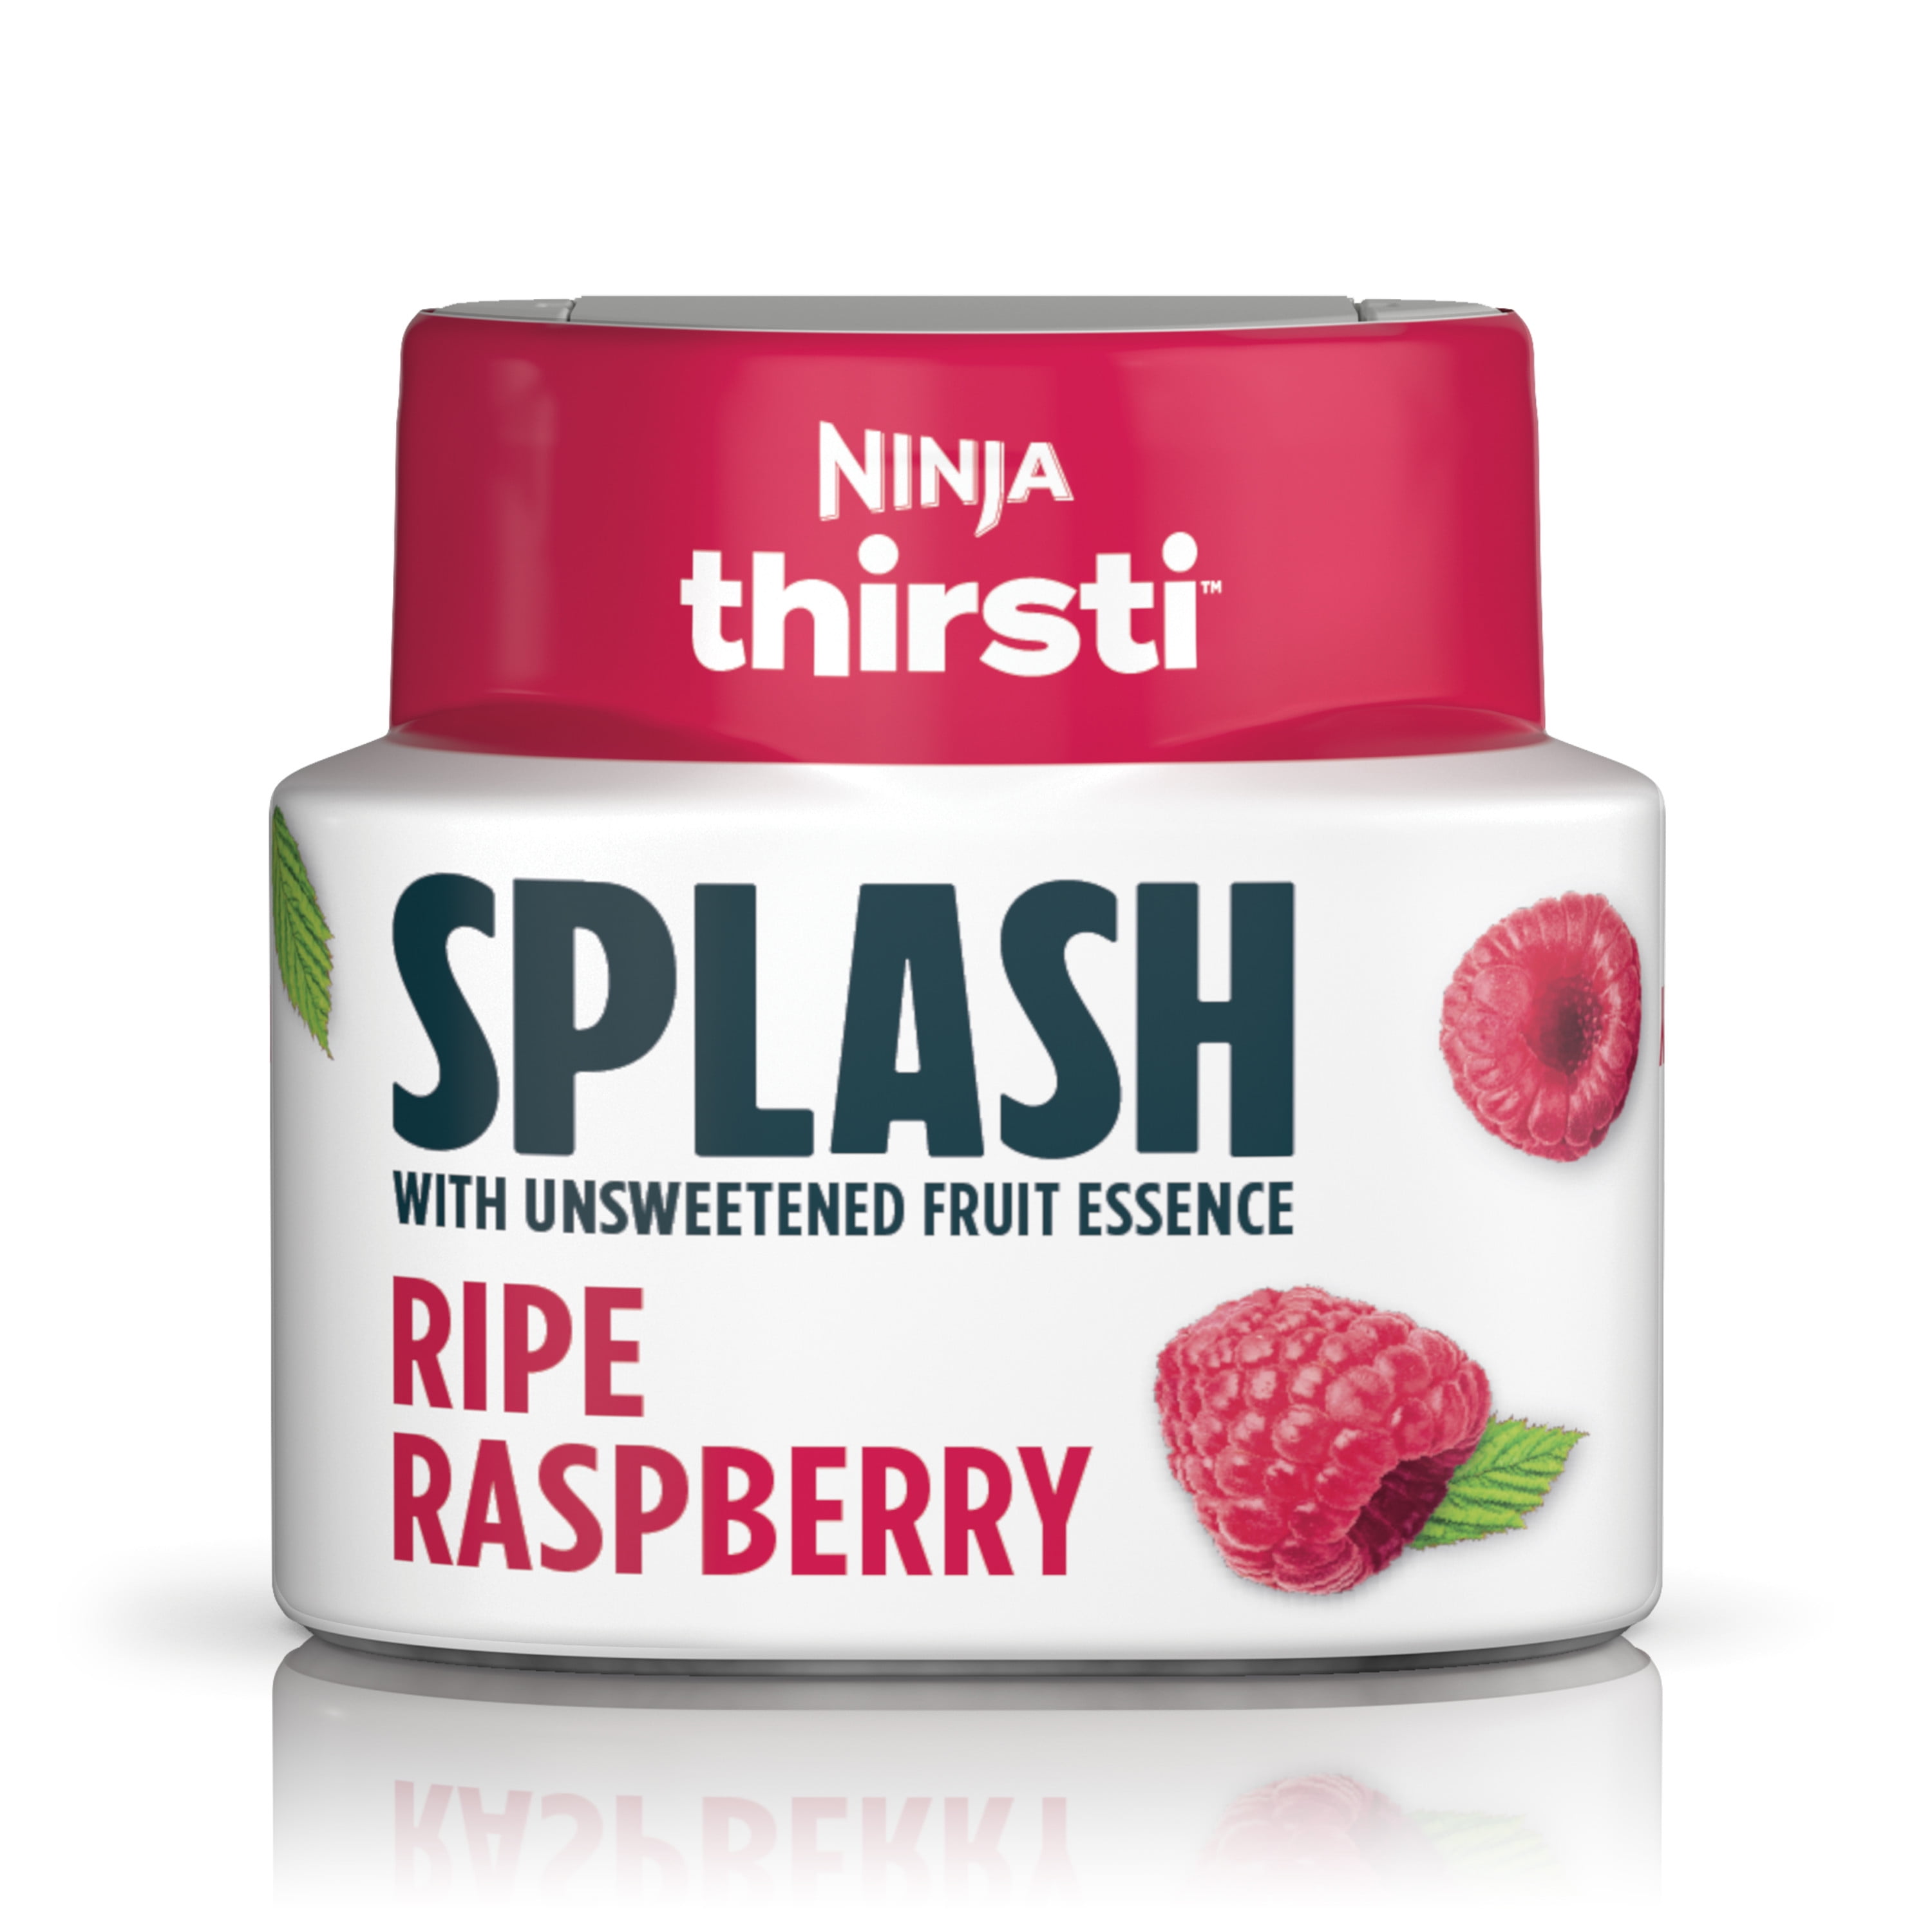 Ninja Thirsti Flavored Water Drops, Lively Lime, Pure Unsweetened